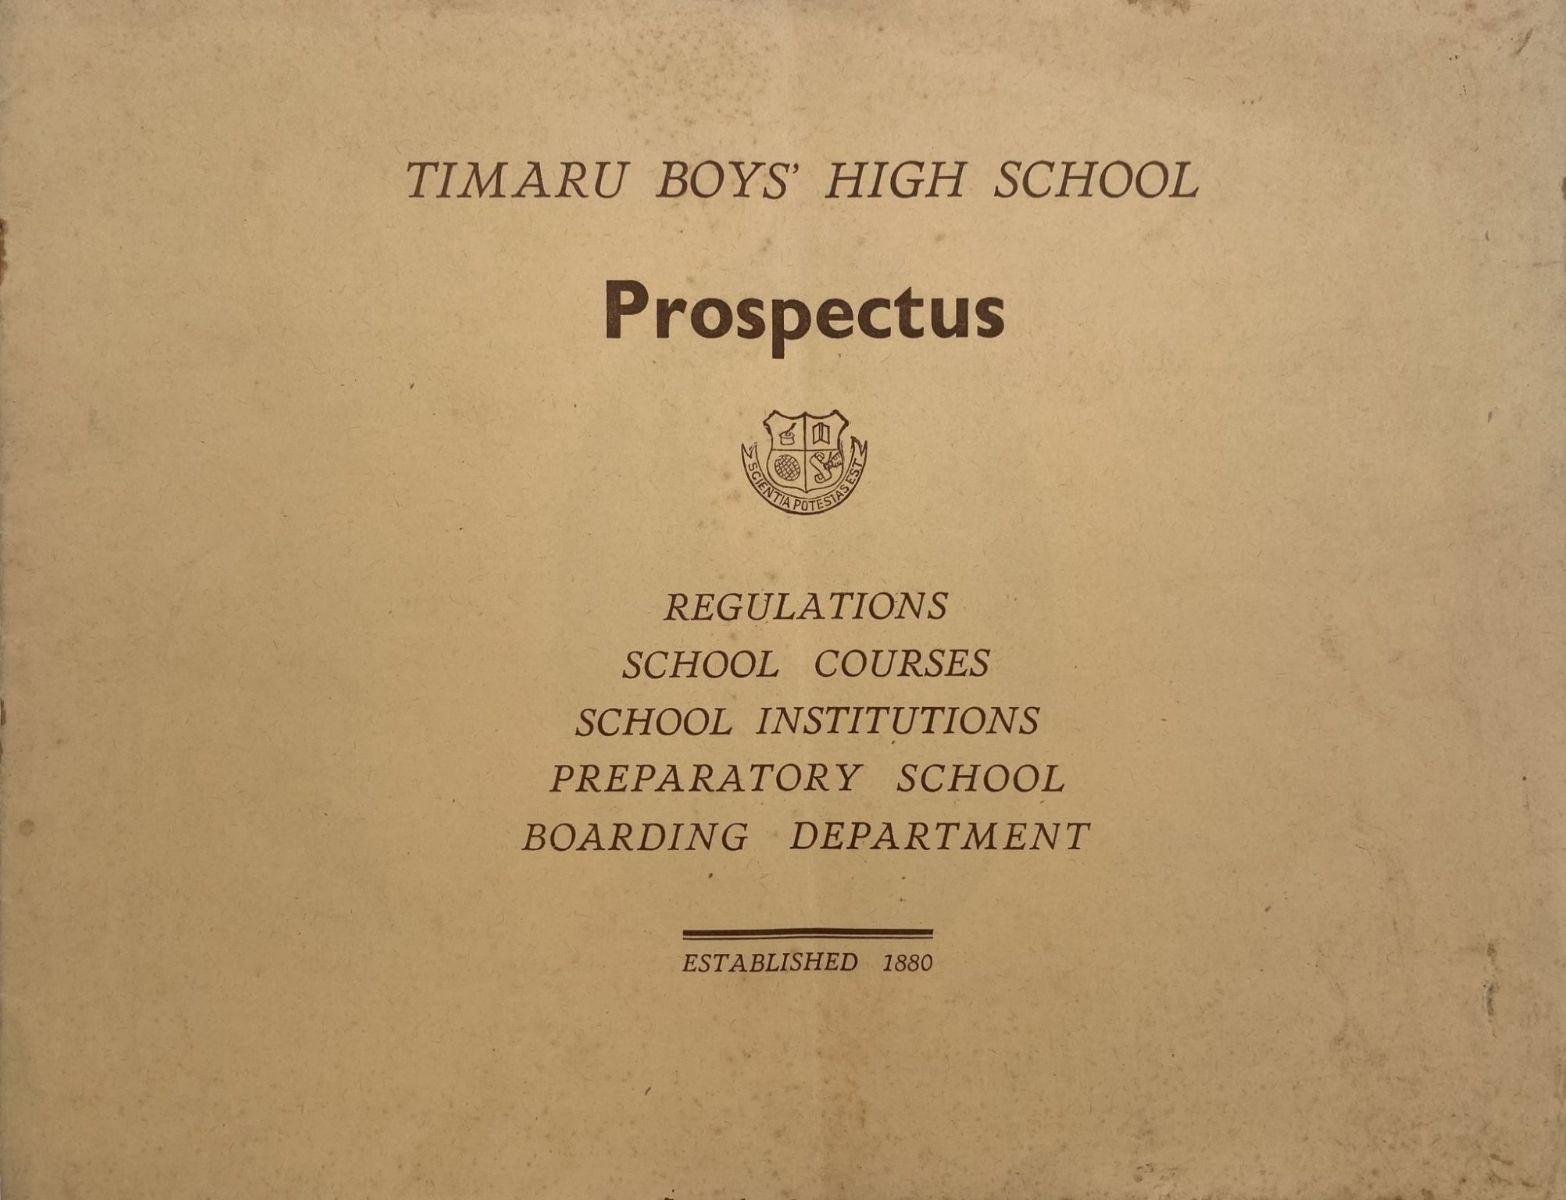 TIMARU BOYS' HIGH SCHOOL - Prospectus from early 1900's